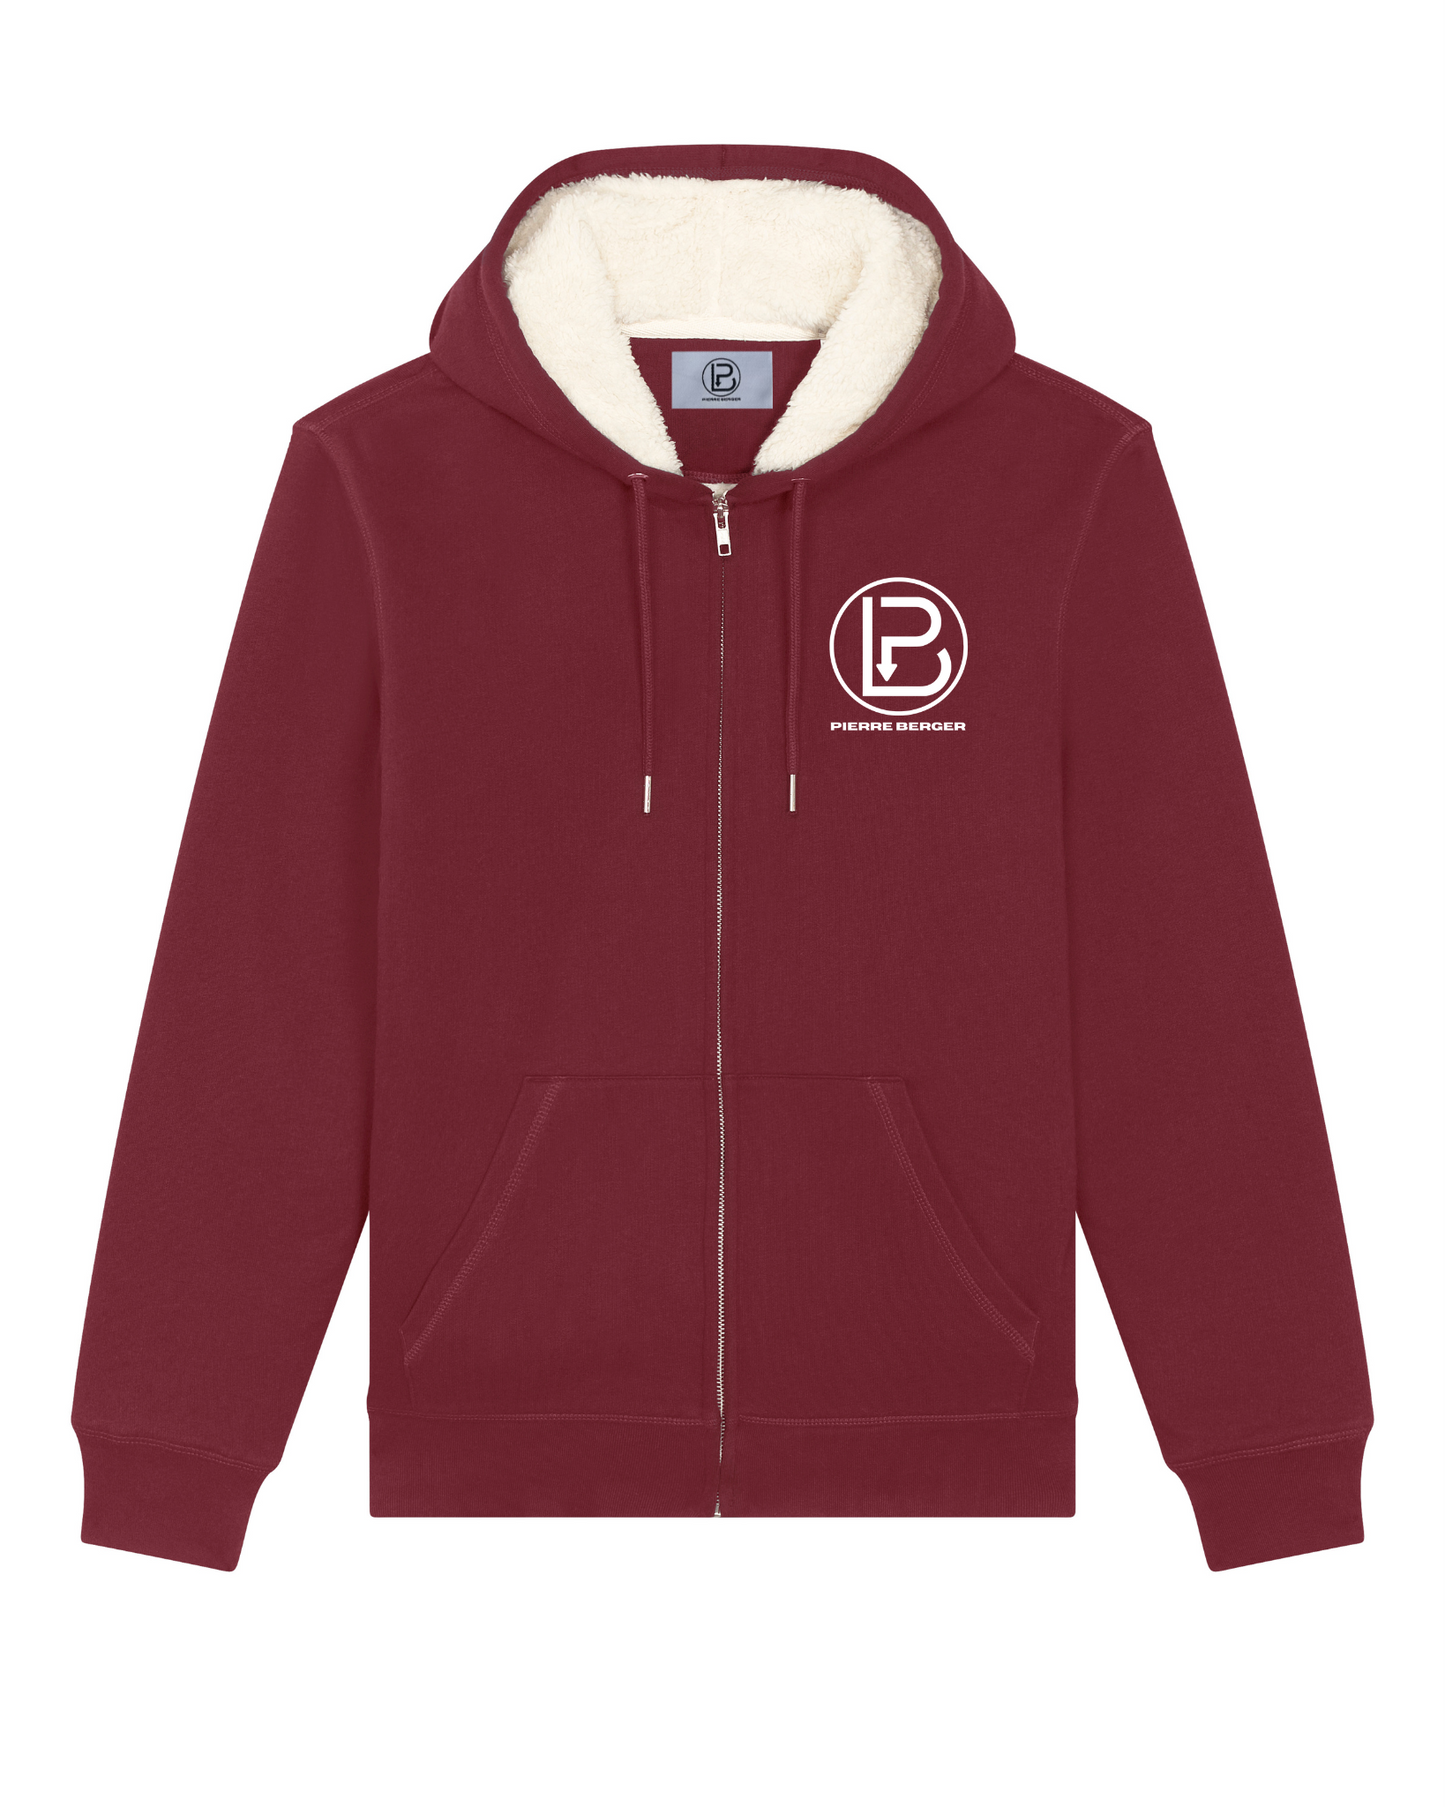 PIERRE BERGER - Unisex zip-up hoodie with Sherpa lining 100% recycled embroidery